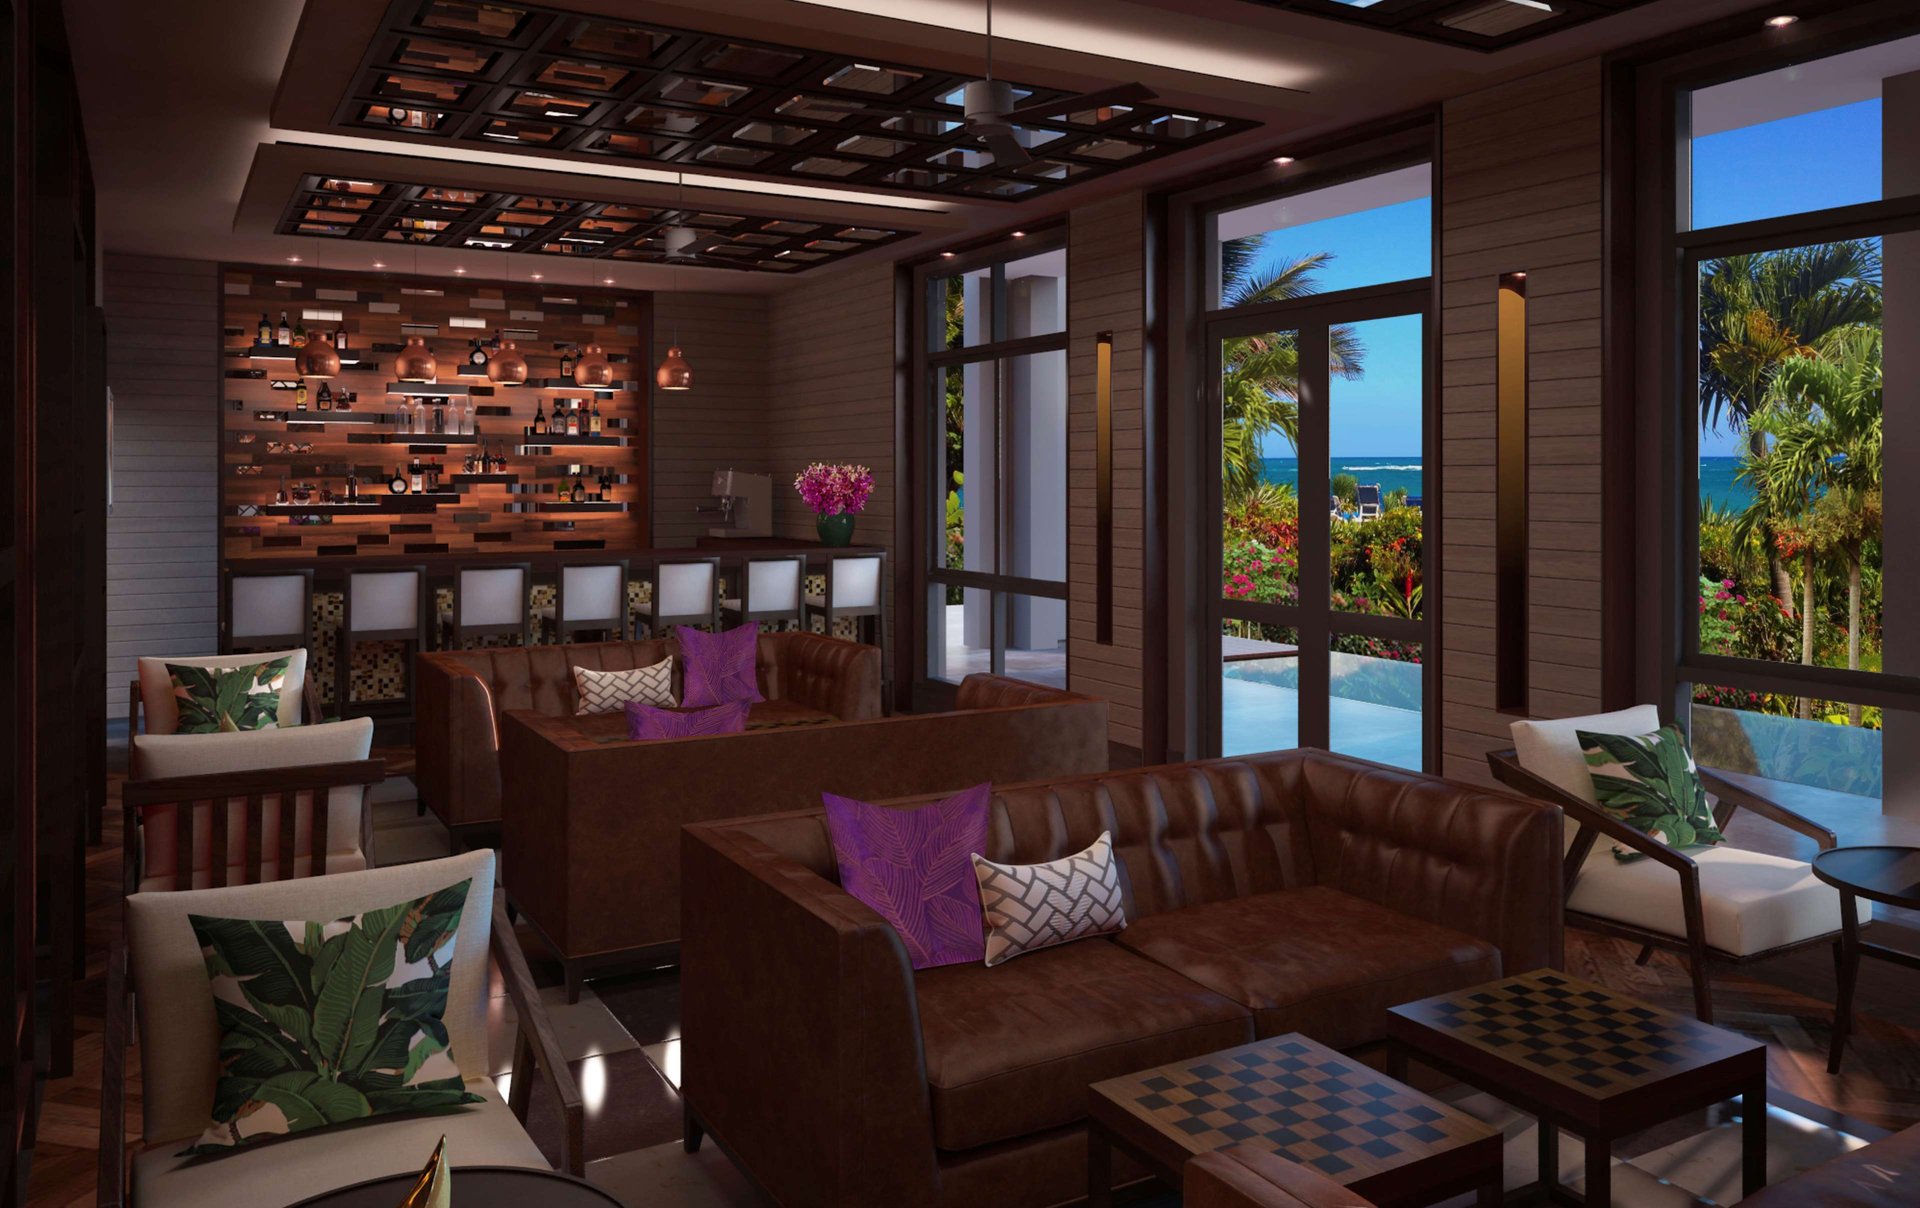 The hotel's cigar bar and lounge, where guests can have an authentic cuban experience trying various cigars and cuban drinks. 